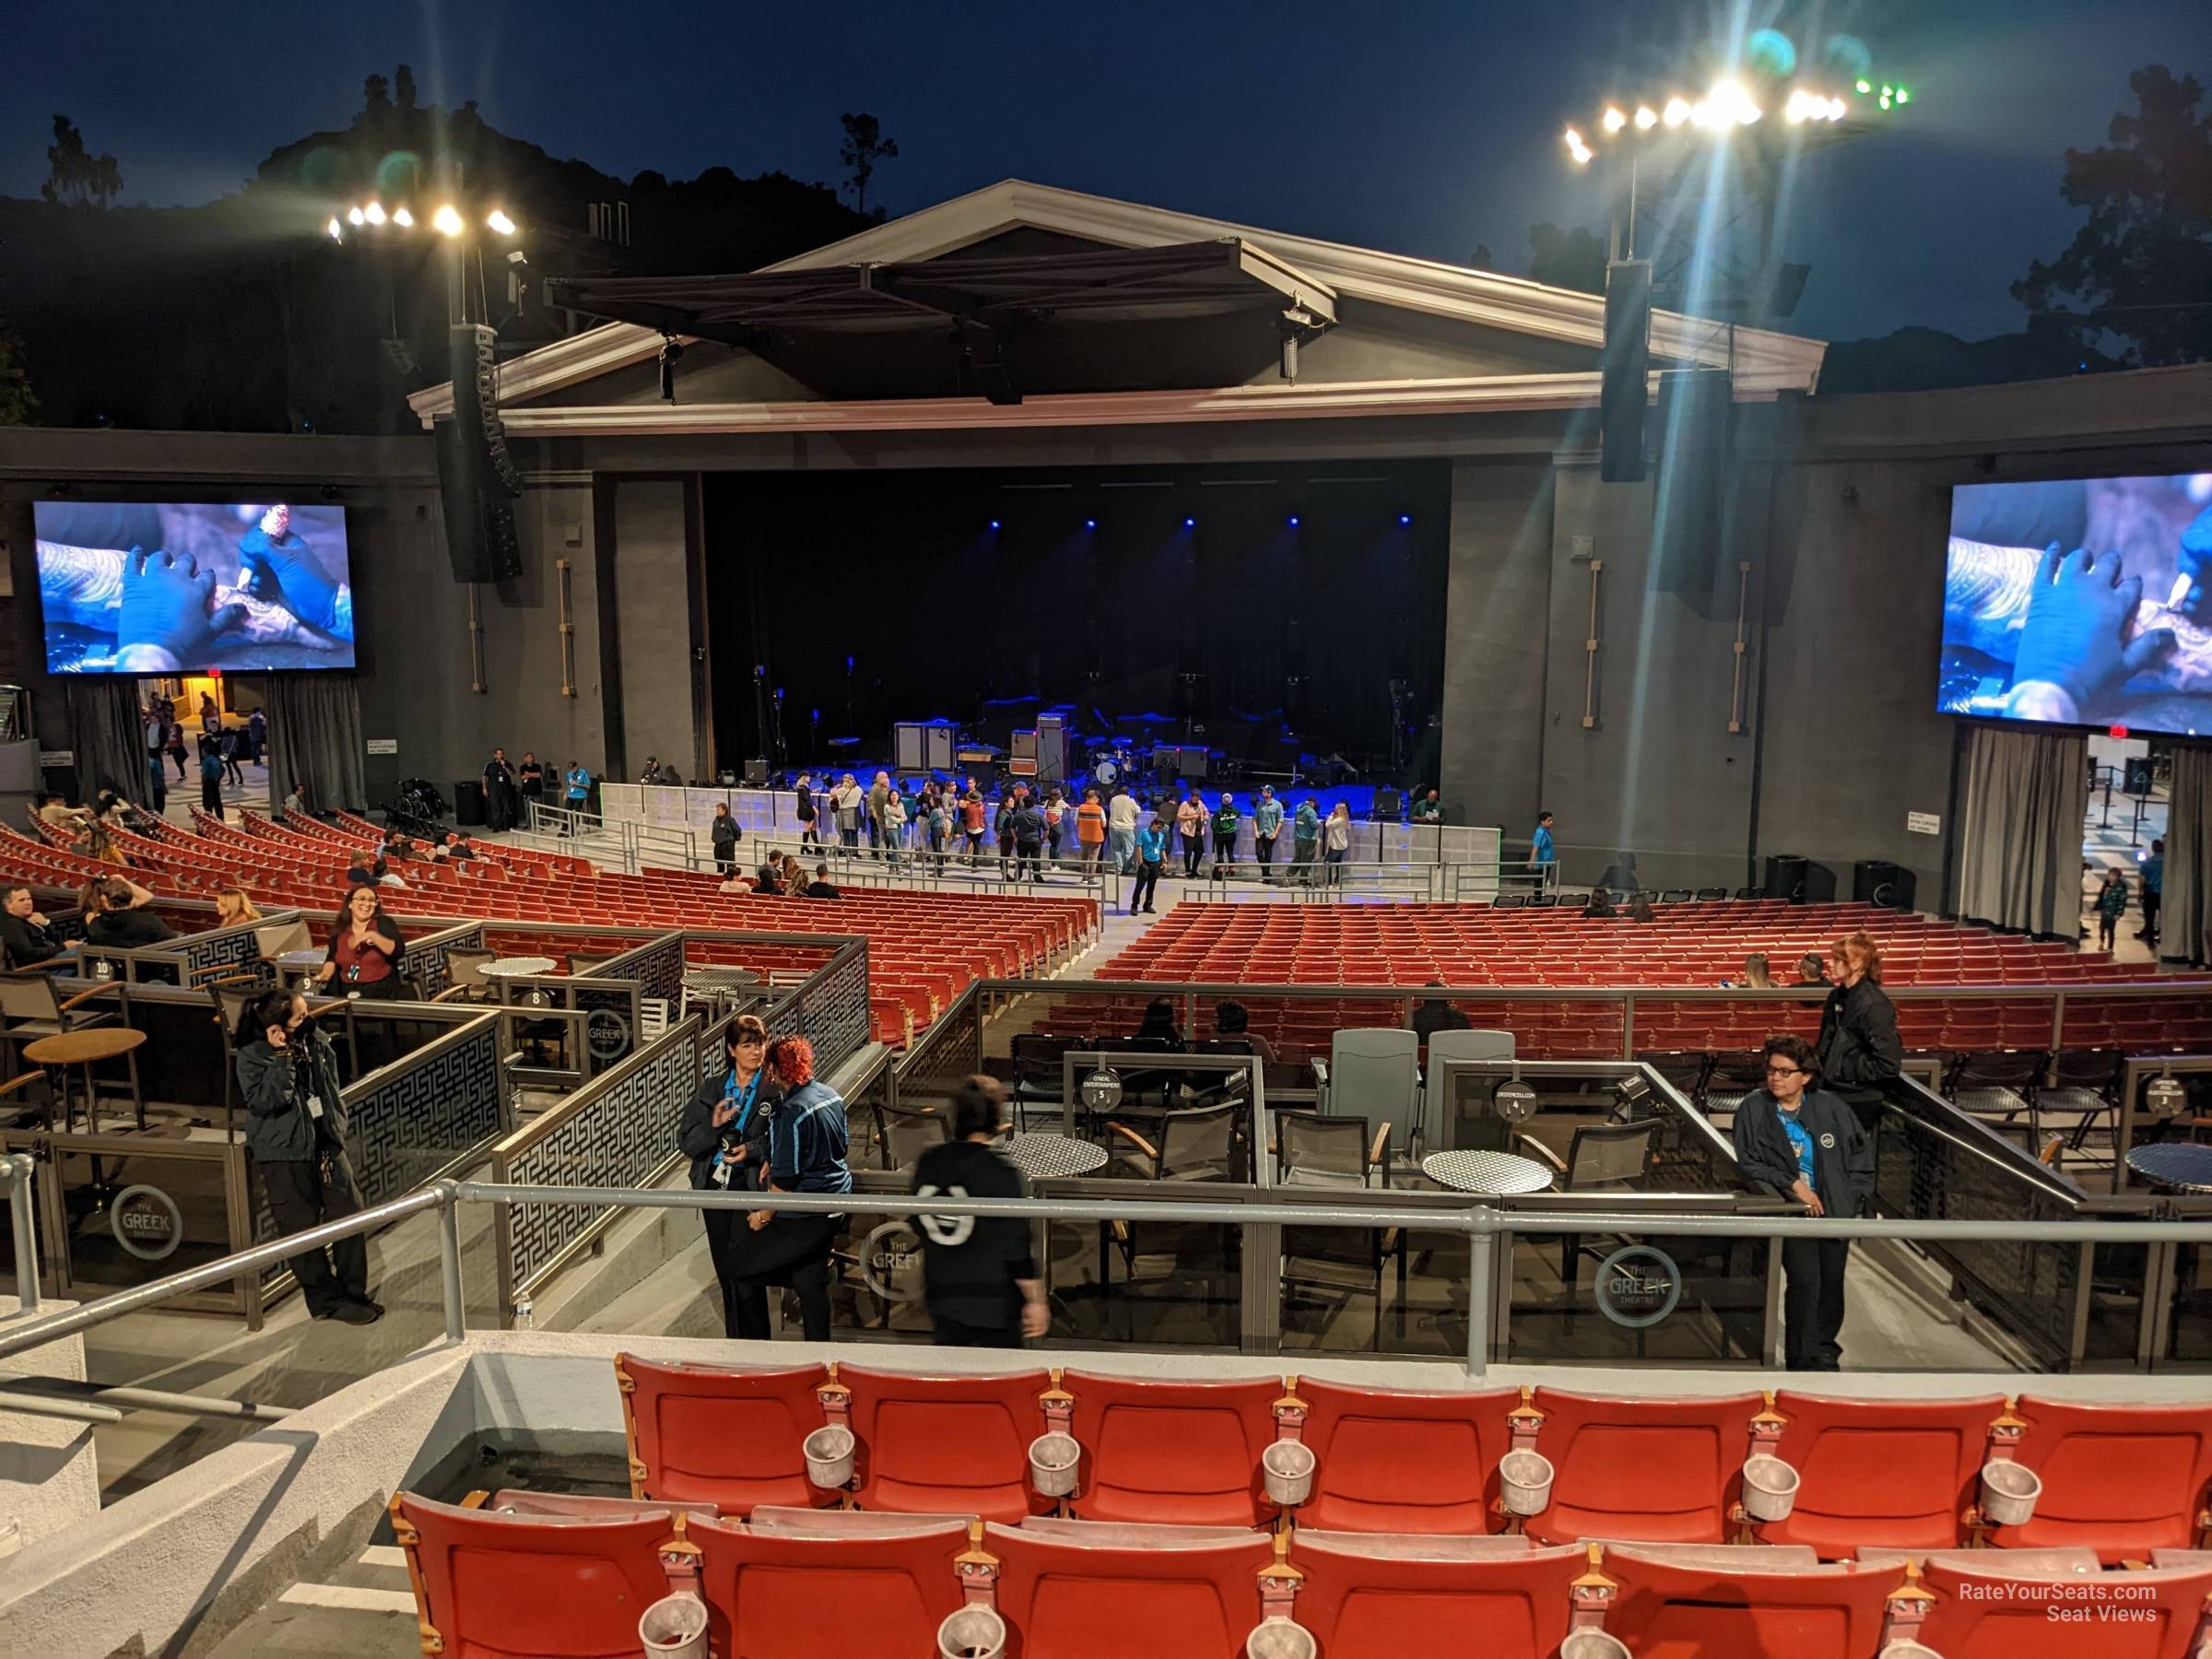 section br, row g seat view  - greek theatre - los angeles